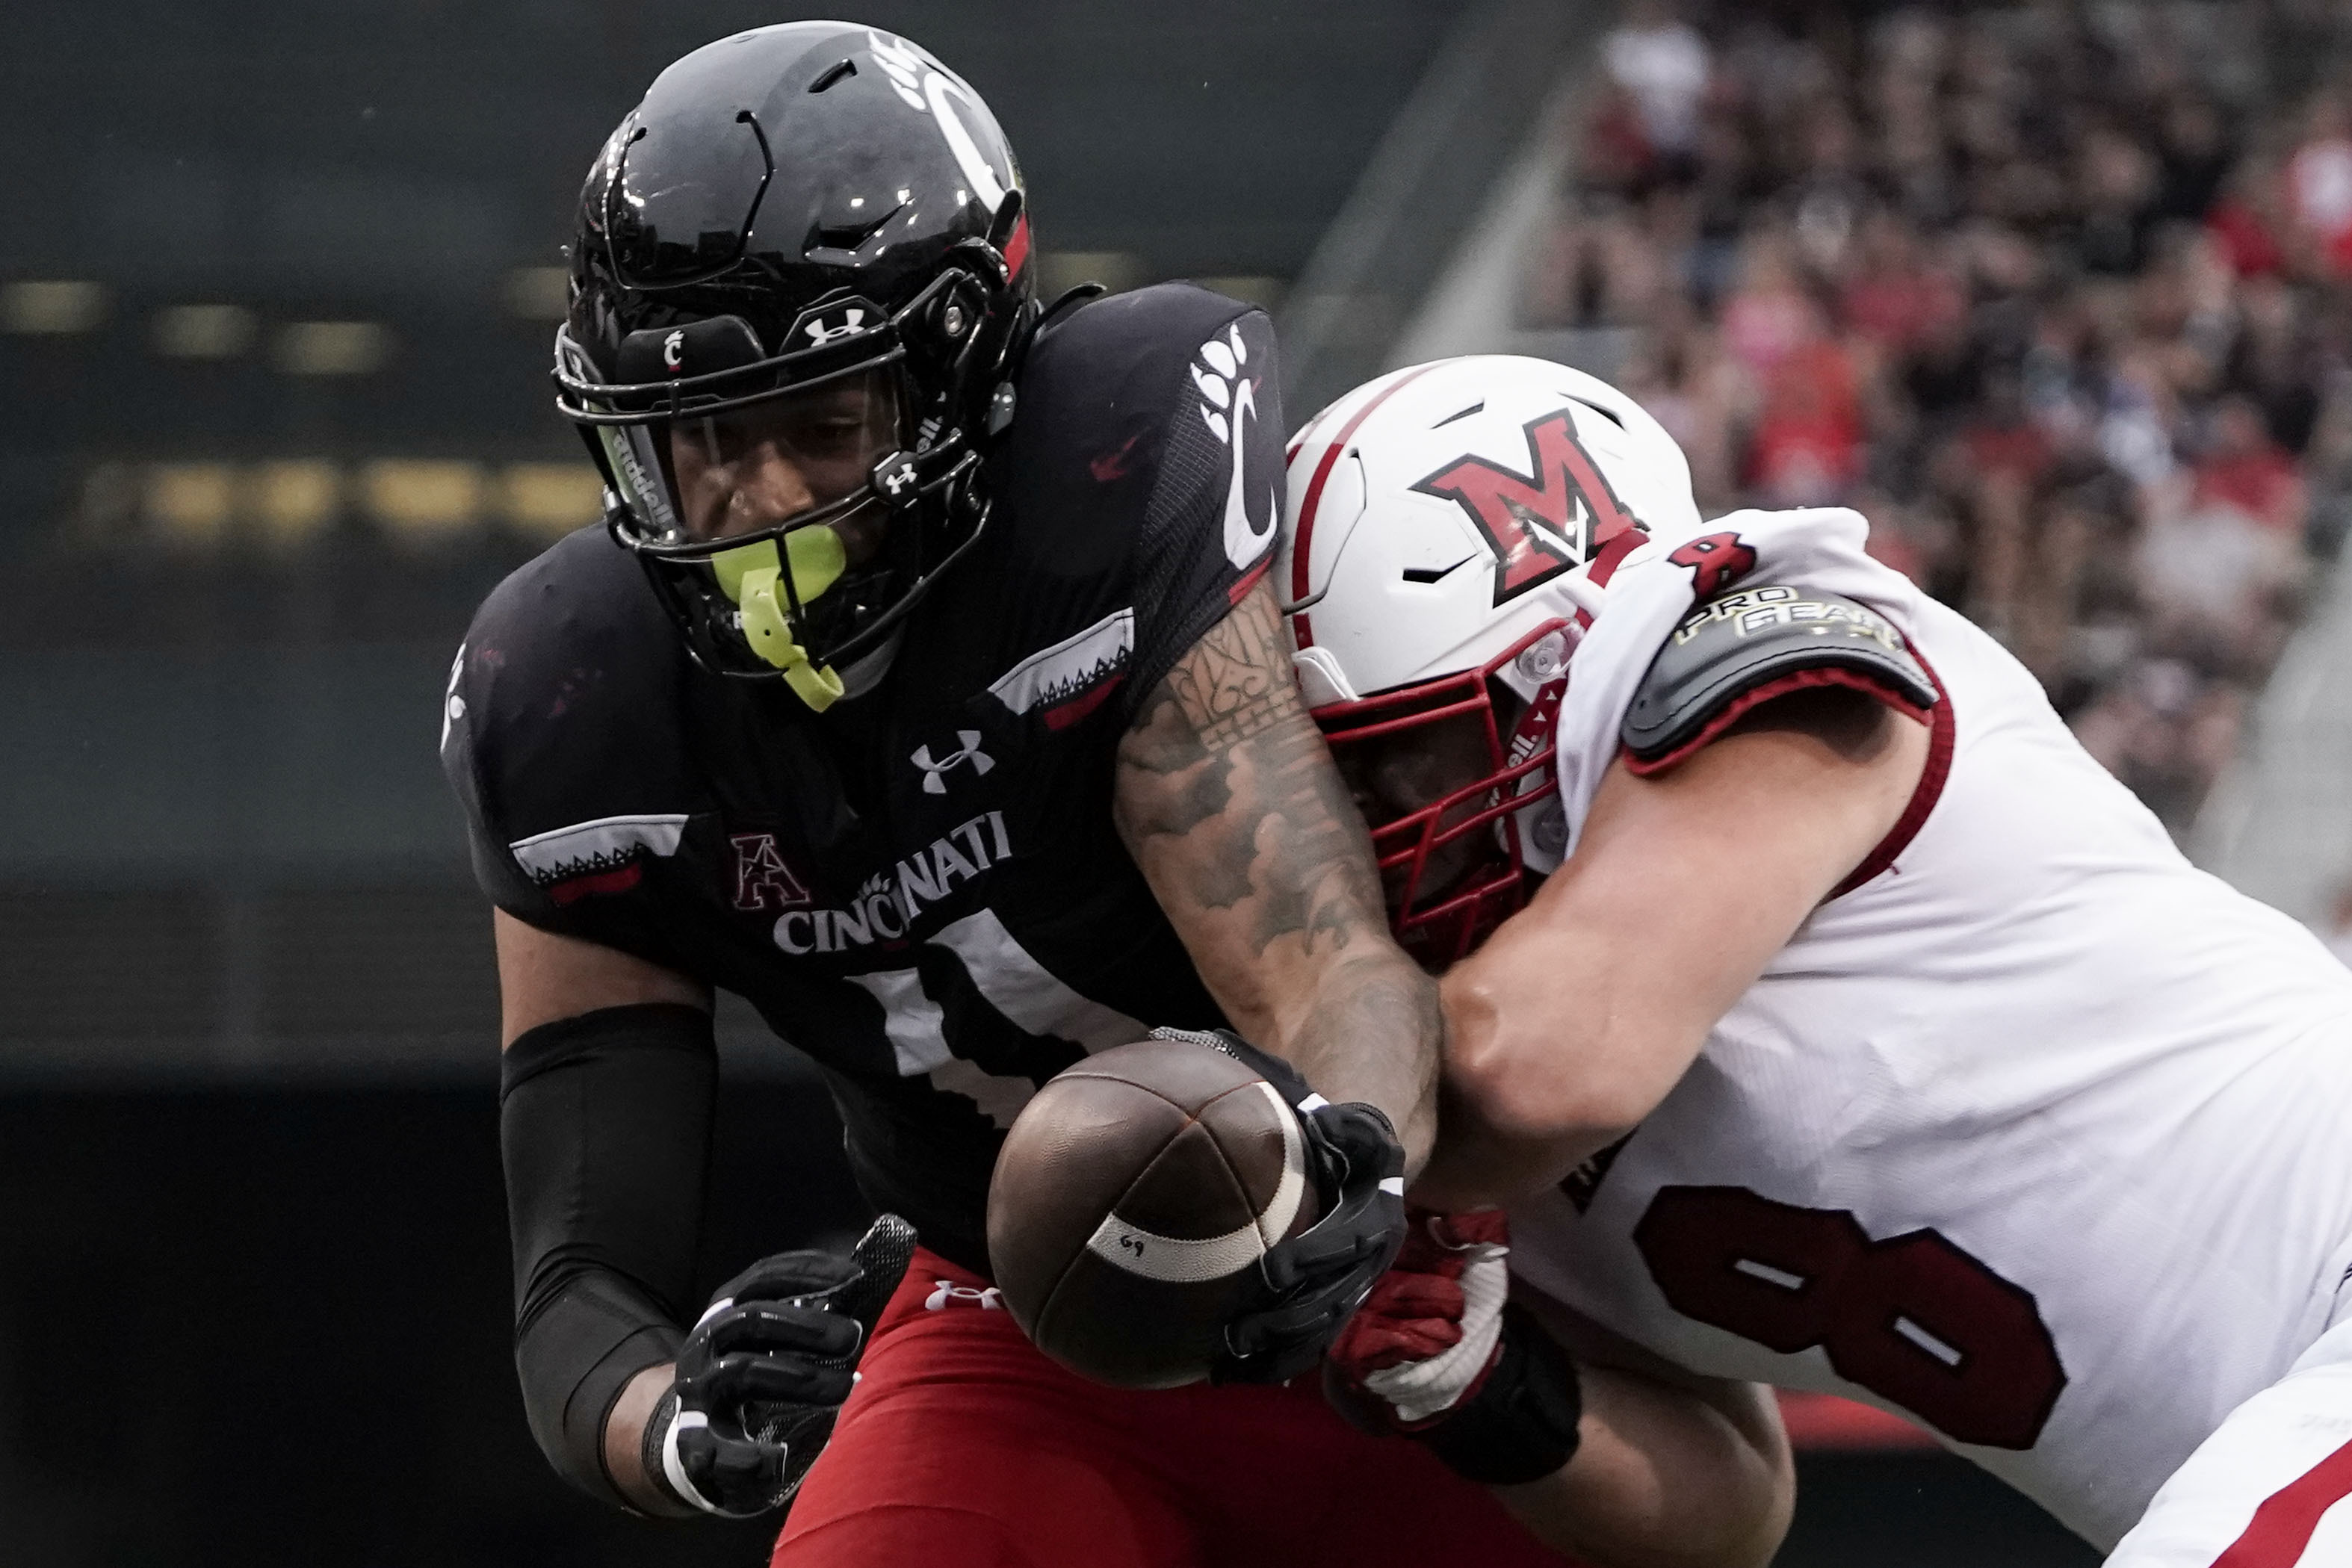 Seventh-ranked Bearcats buoyed by sold-out Nippert